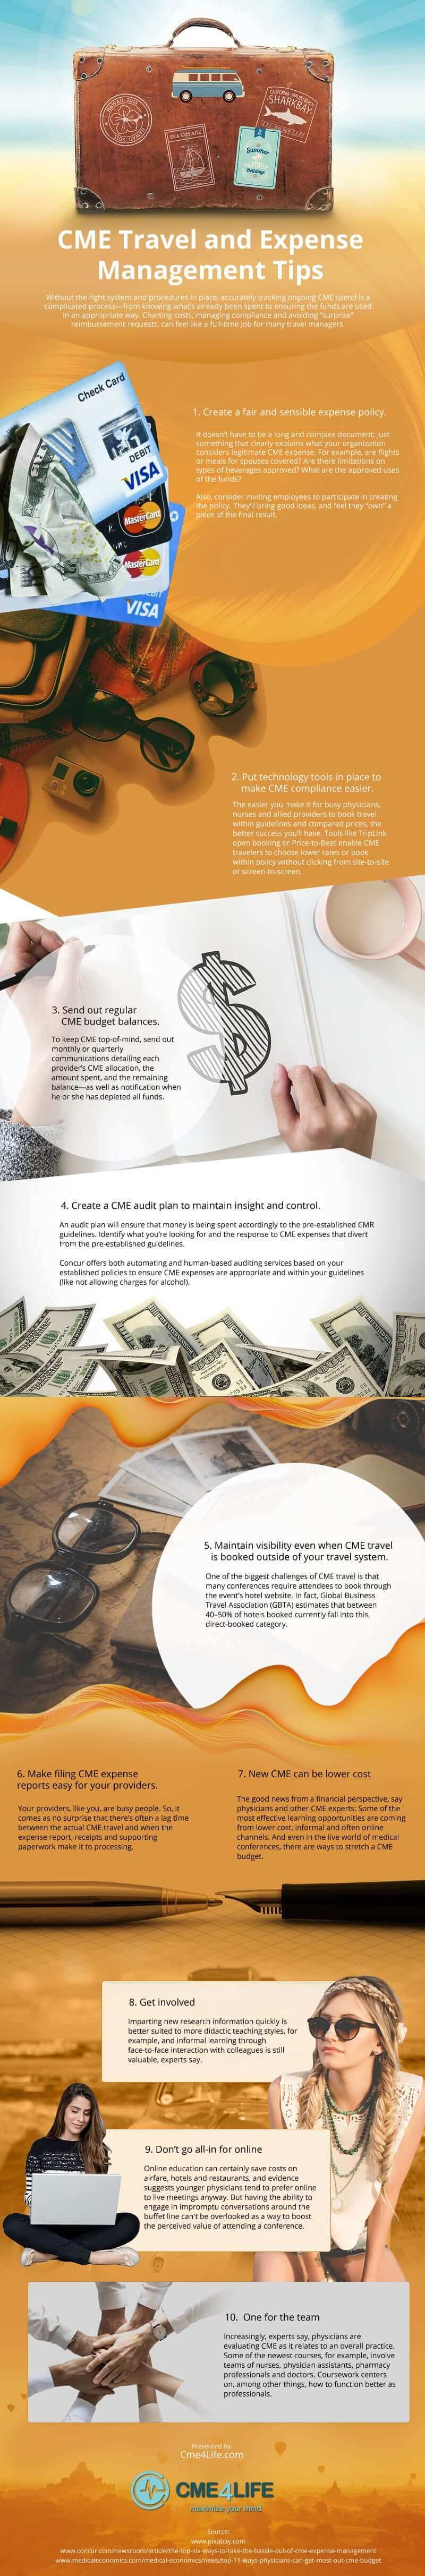 CME Travel and Expense Management Tips [infographic]